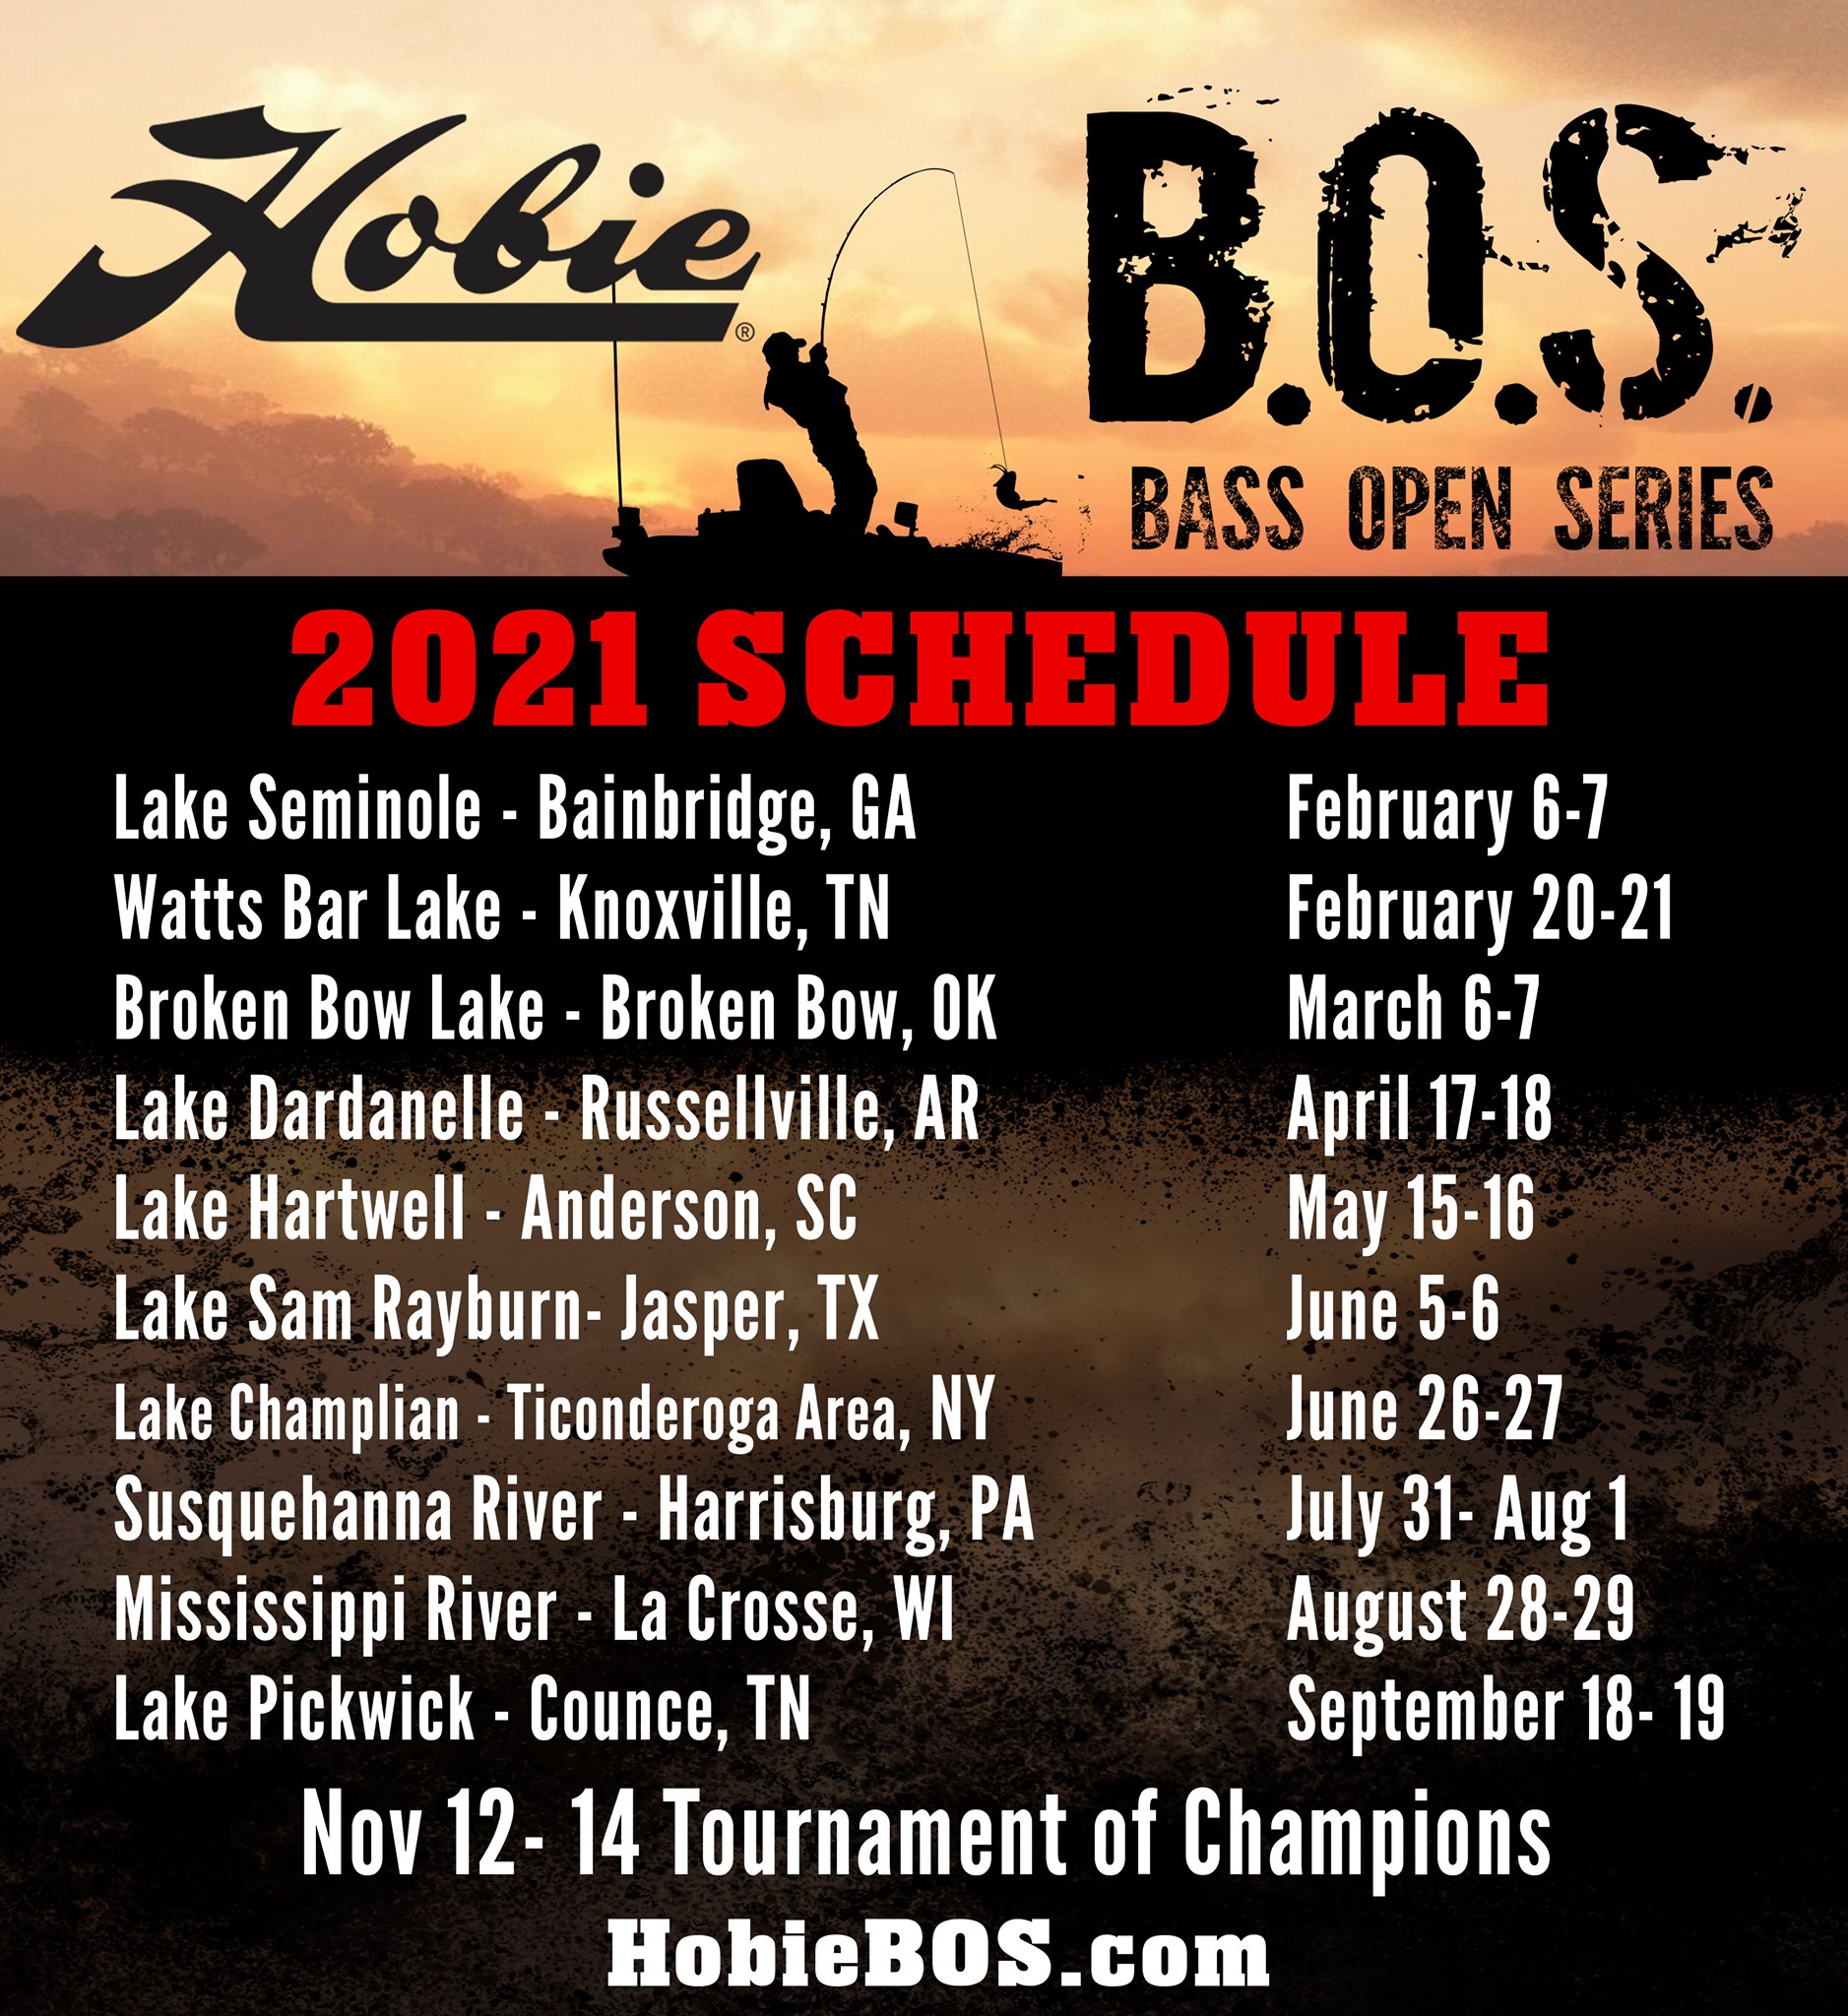 The 2021 schedule for HBOS